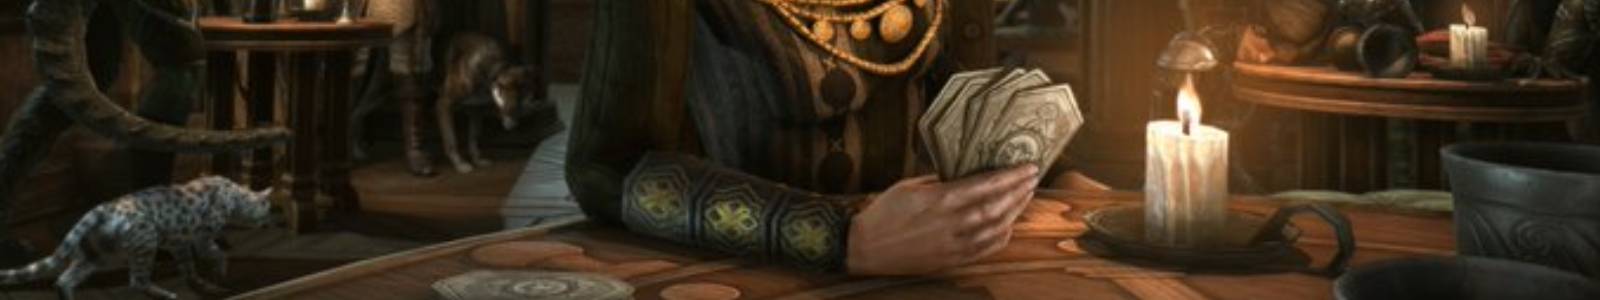 Hlaalu Councilor Clue Tales of Tribute Clue - ESO header